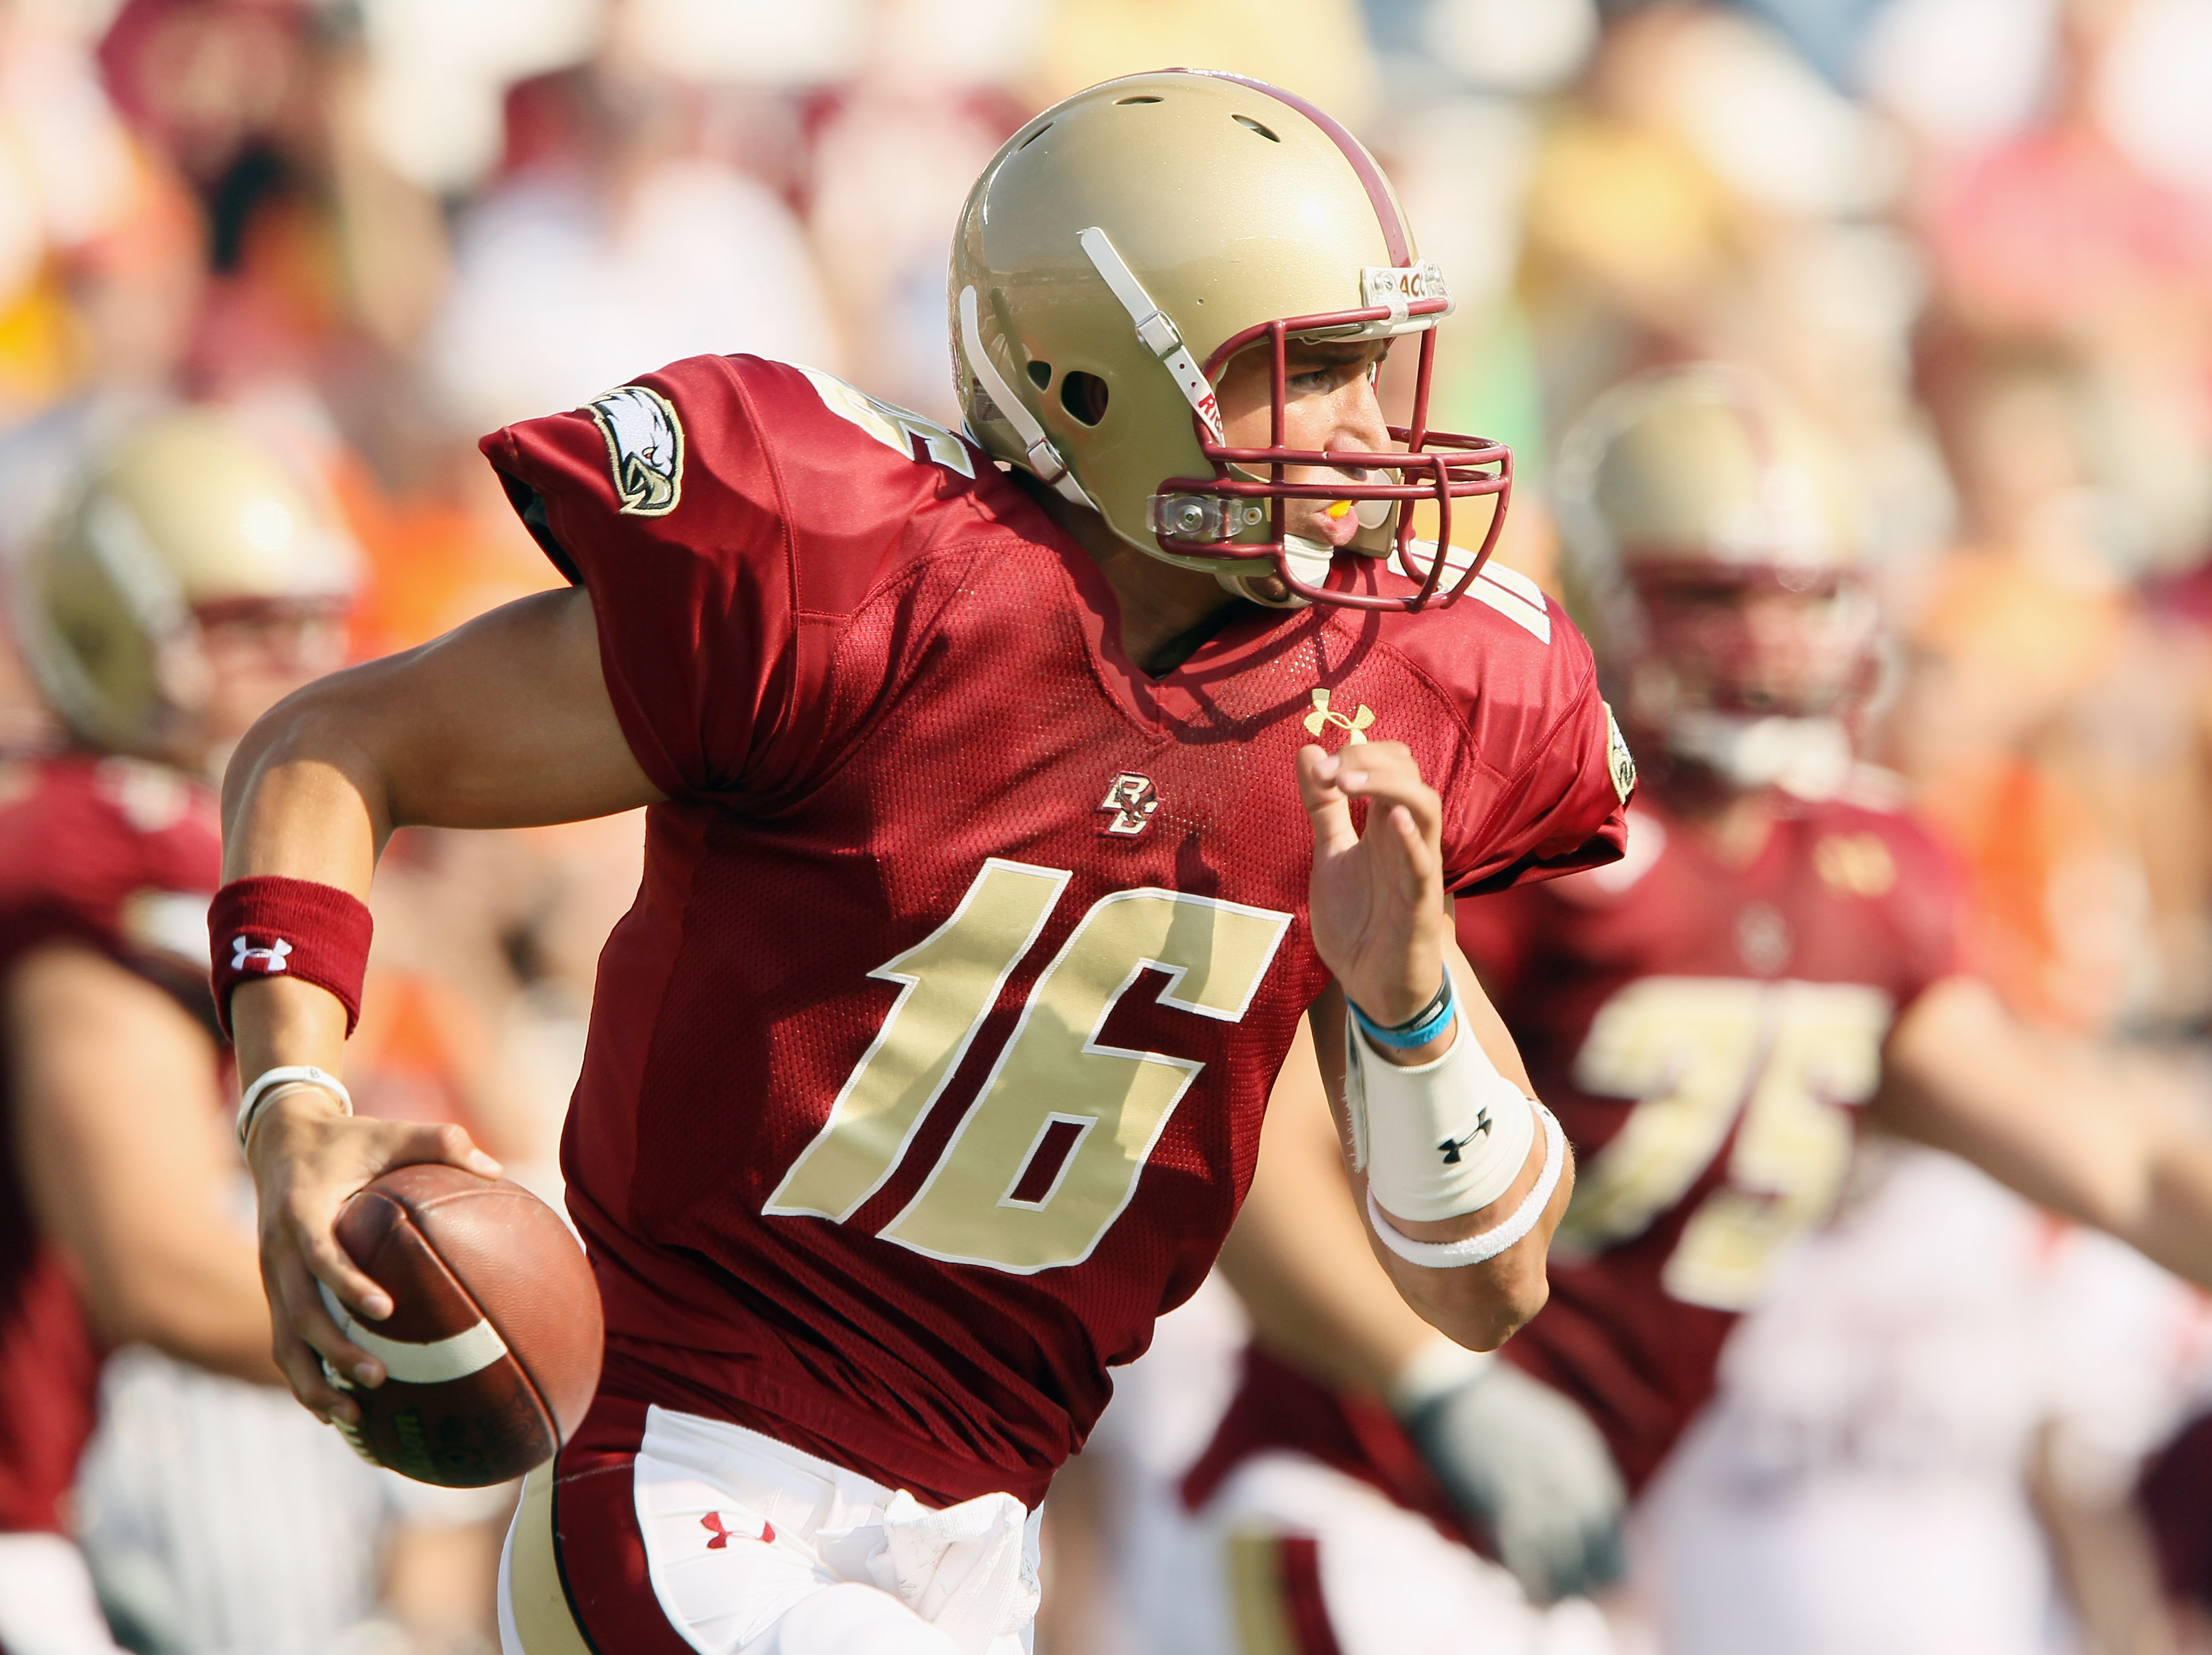 CHESTNUT HILL, MA - SEPTEMBER 25:  Mike Marscovetra #16 of the Boston College Eagles scrambles with the ball in the fourth quarter against the Virginia Tech Hokies on September 25, 2010 at Alumni Stadium in Chestnut Hill, Massachusetts. Virginia Tech defe